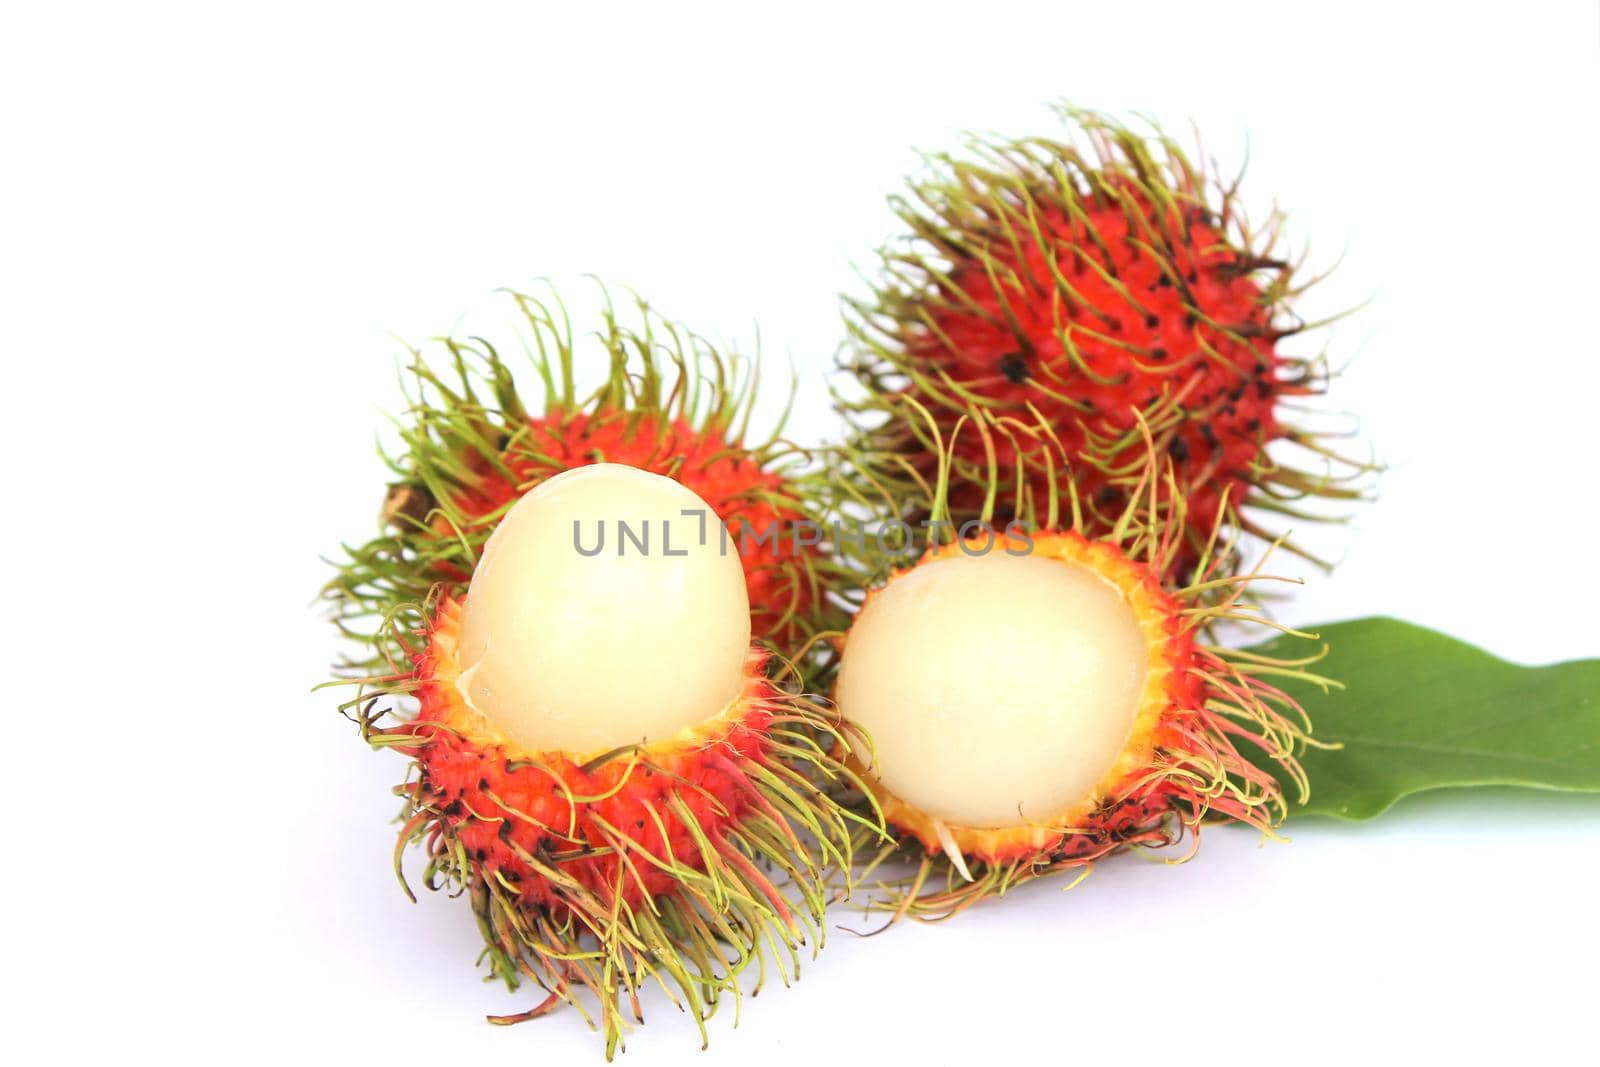 Sweet rambutan, popular fruit in Thailand isolated on white background. Peel the skin to reveal the seeds inside. with leaves